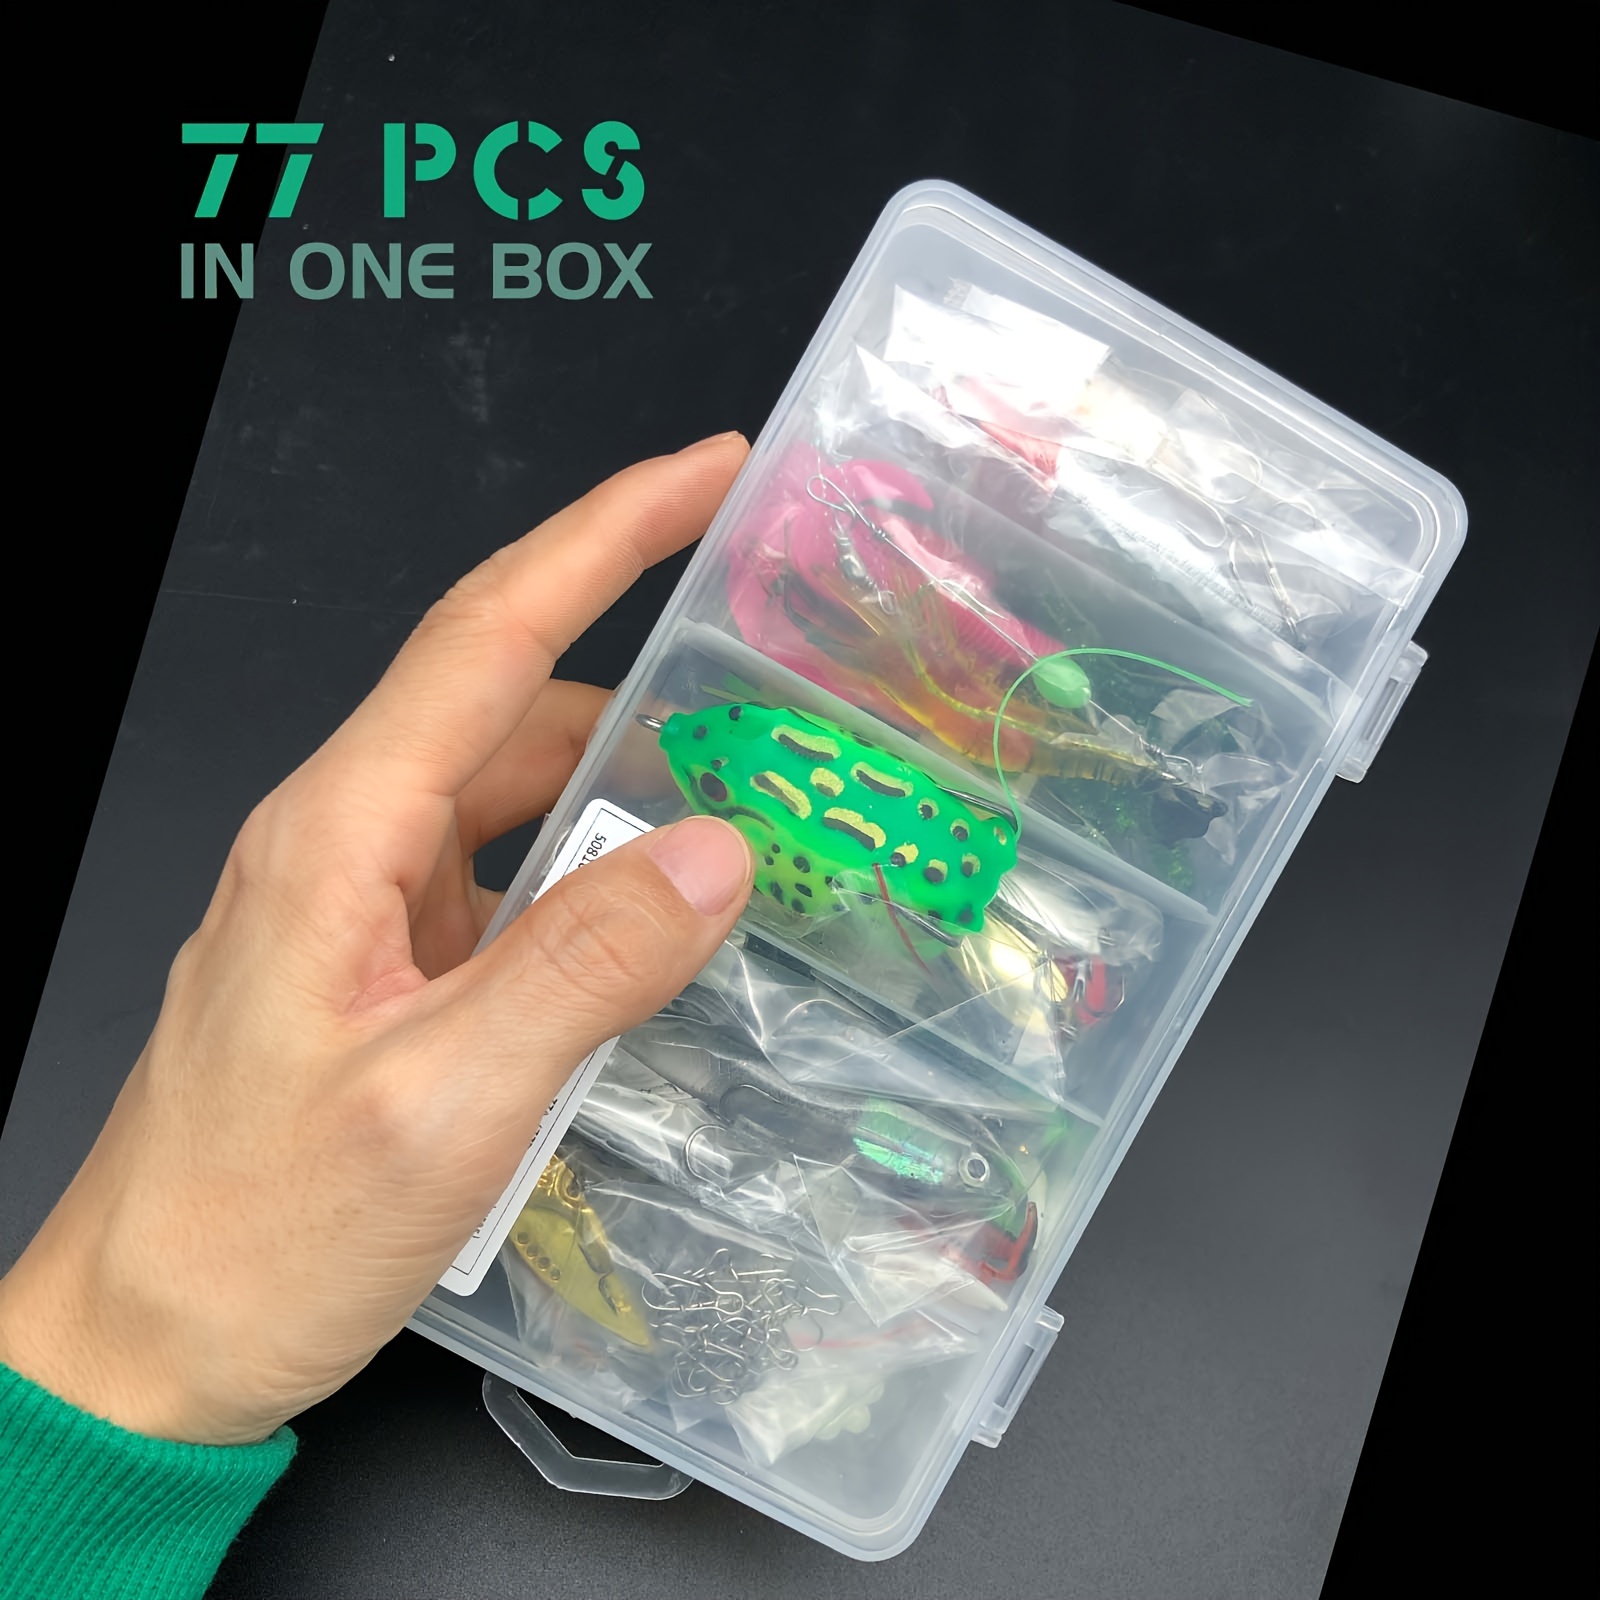  Fishing Lures Baits Tackle Kit for Bass Trout Salmon Fishing  Tackle Box Including Spoon Lures Soft Plastic Worms Crankbait Jigs Fishing  Hooks,108/70Pcs Fishing Gear Lures Kit Set (70) : Sports